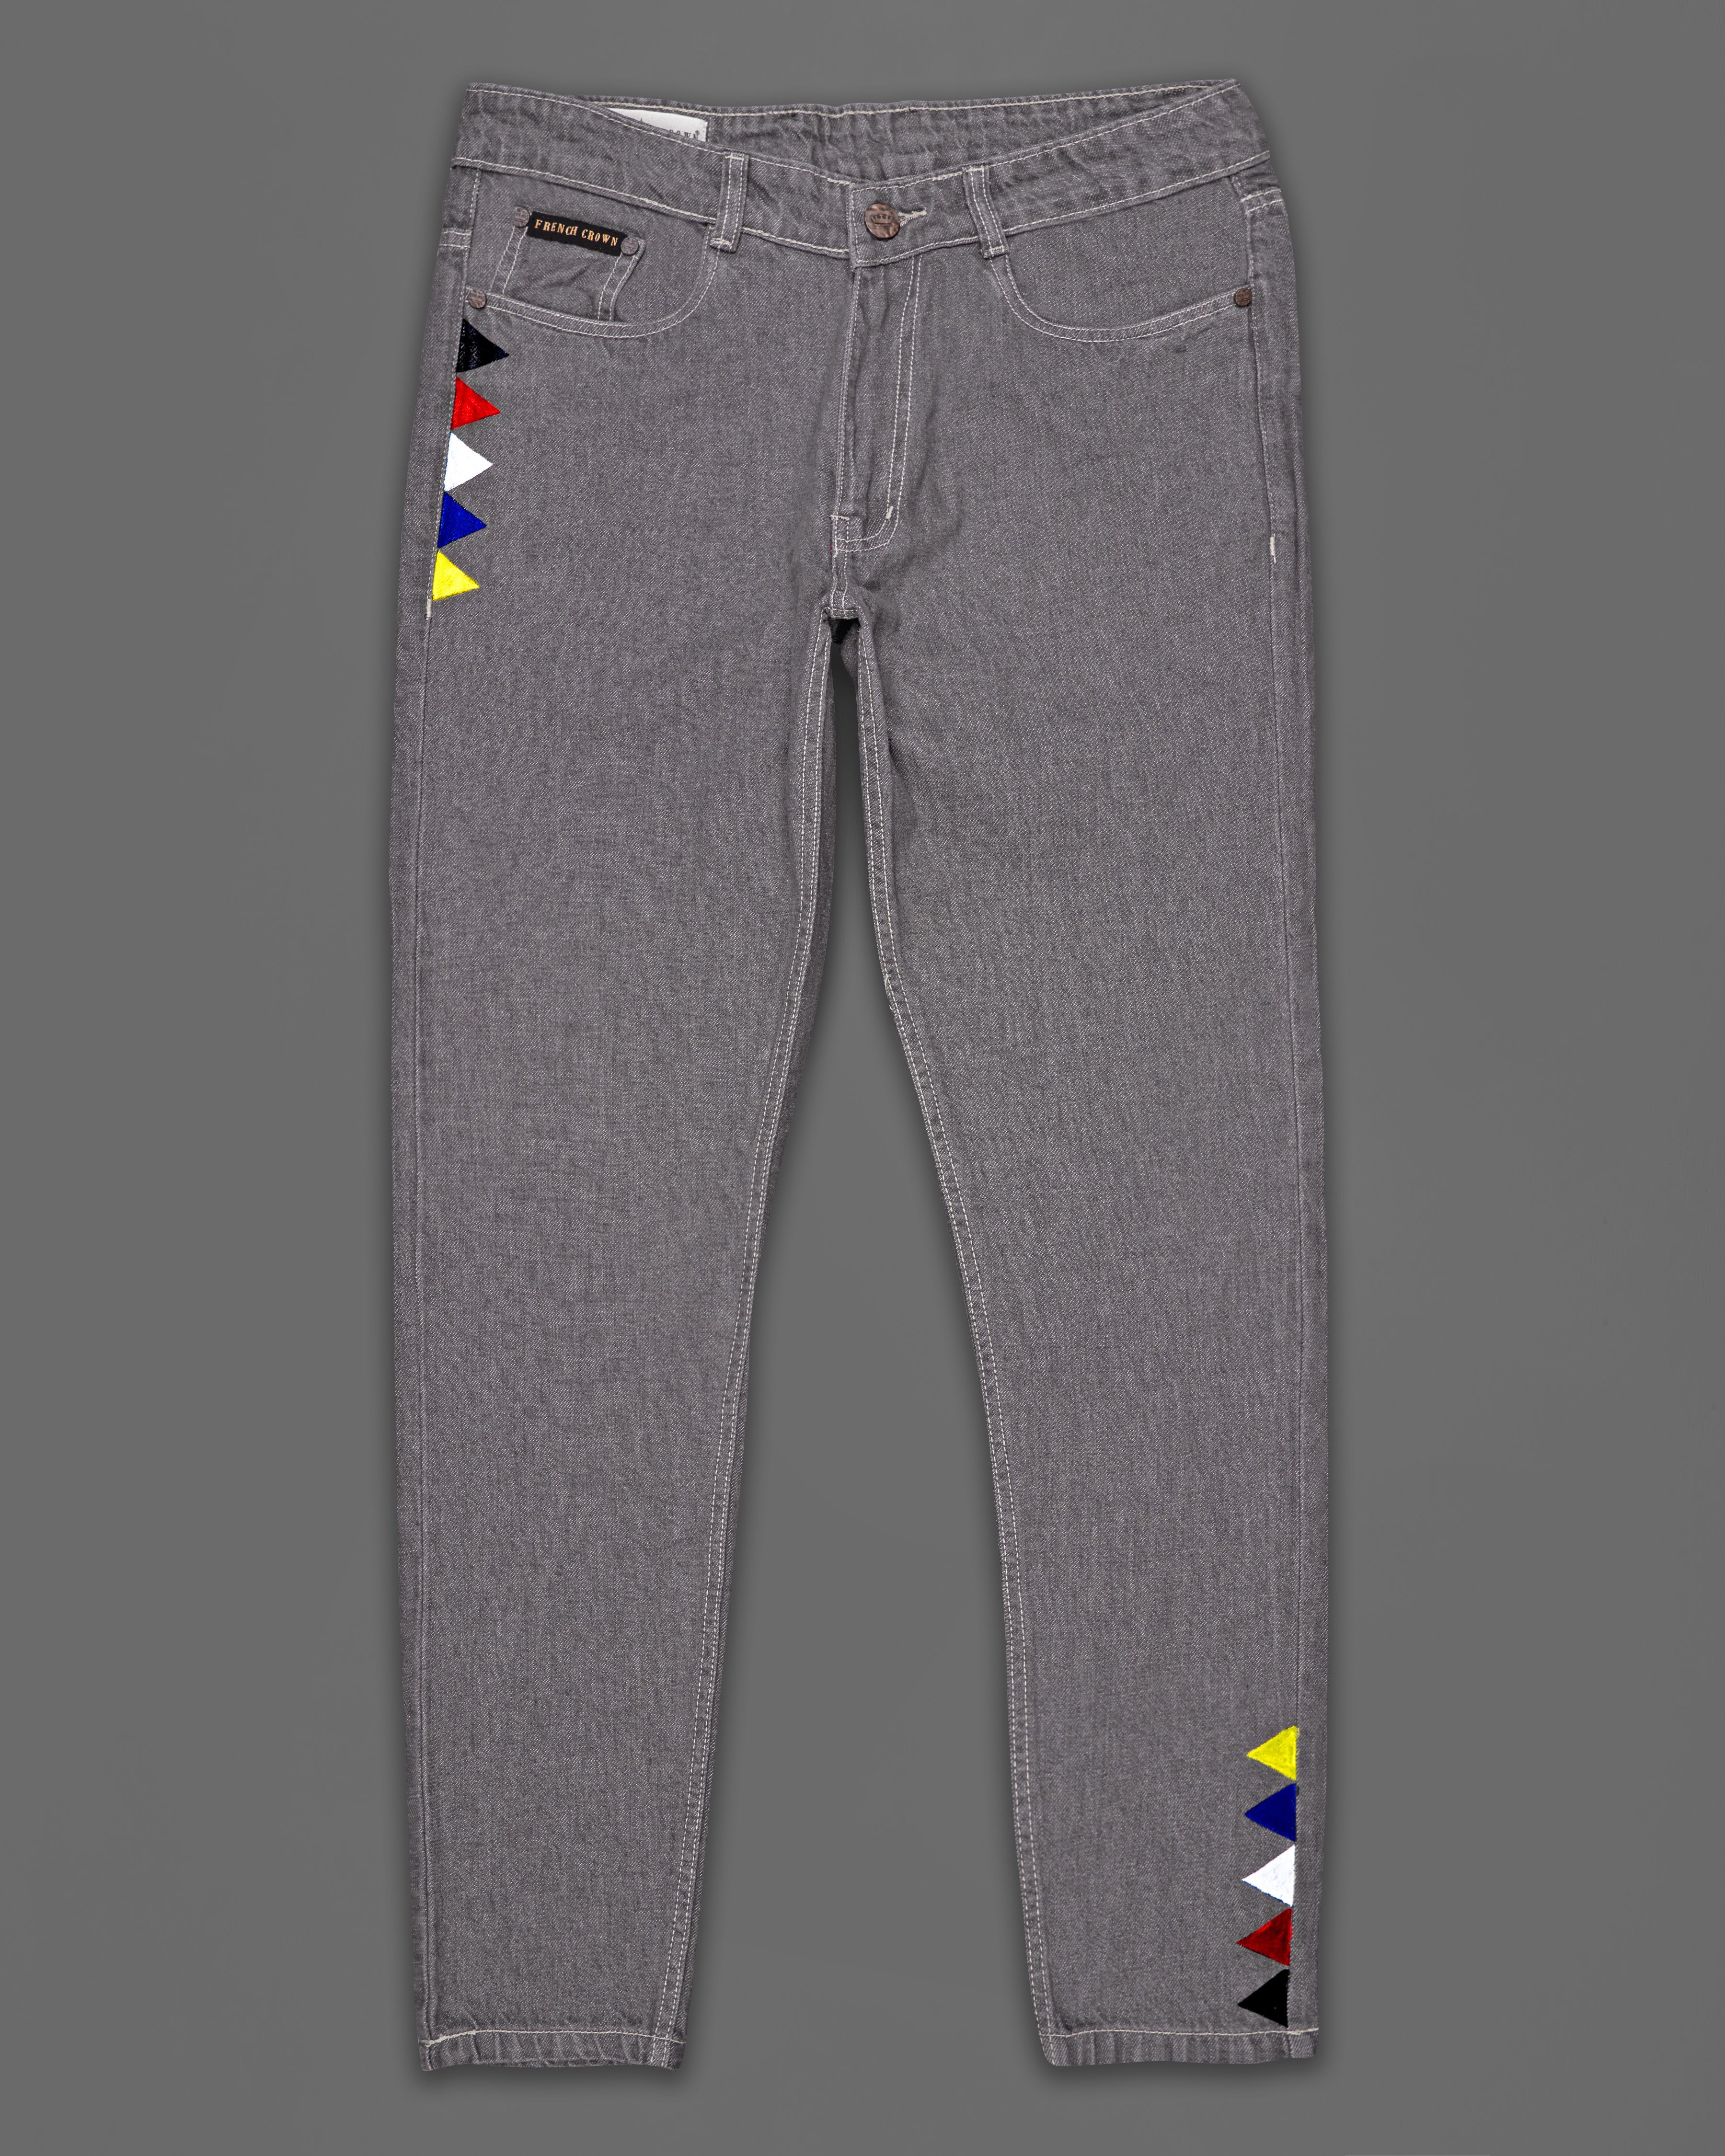 Flint Gray Multicolour Hand Painted Rinse Wash Denim J080-ART-32, J080-ART-34, J080-ART-36, J080-ART-38, J080-ART-40